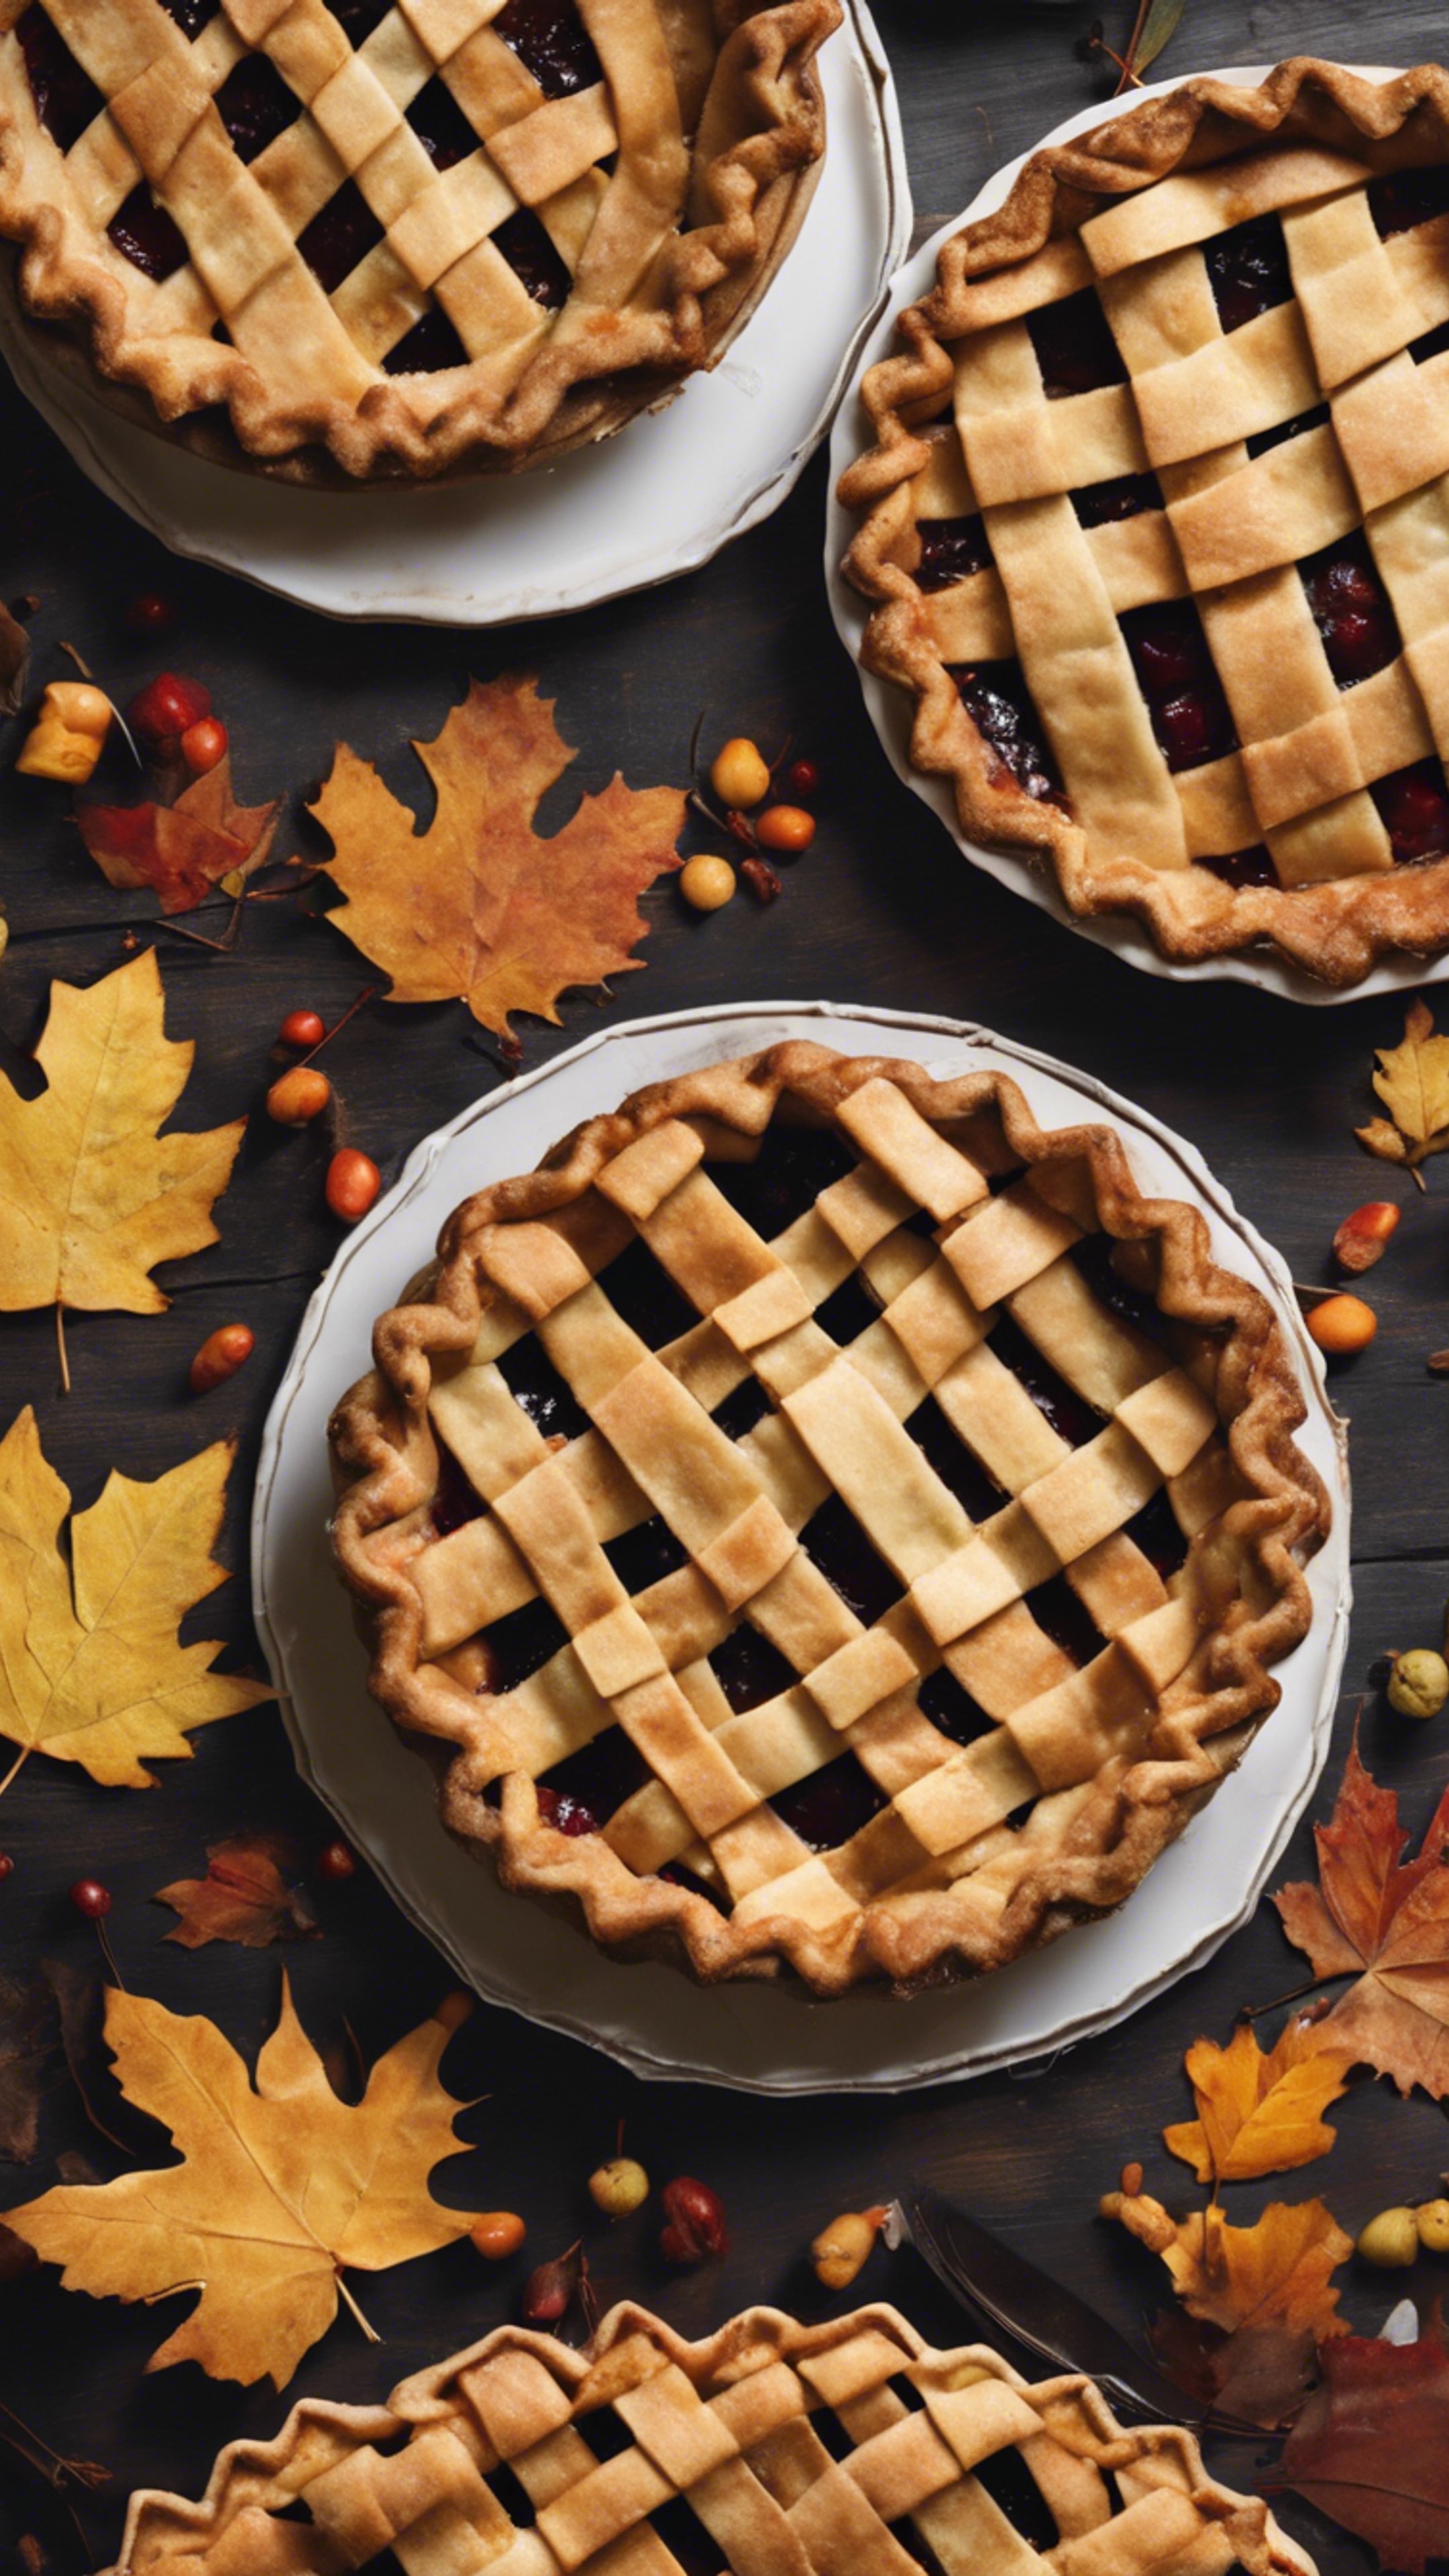 A stylized image of homemade pies decorated with intricate lattice work and autumn leaf pie crusts for an aesthetic Thanksgiving.壁紙[93a52954e57a4efda909]